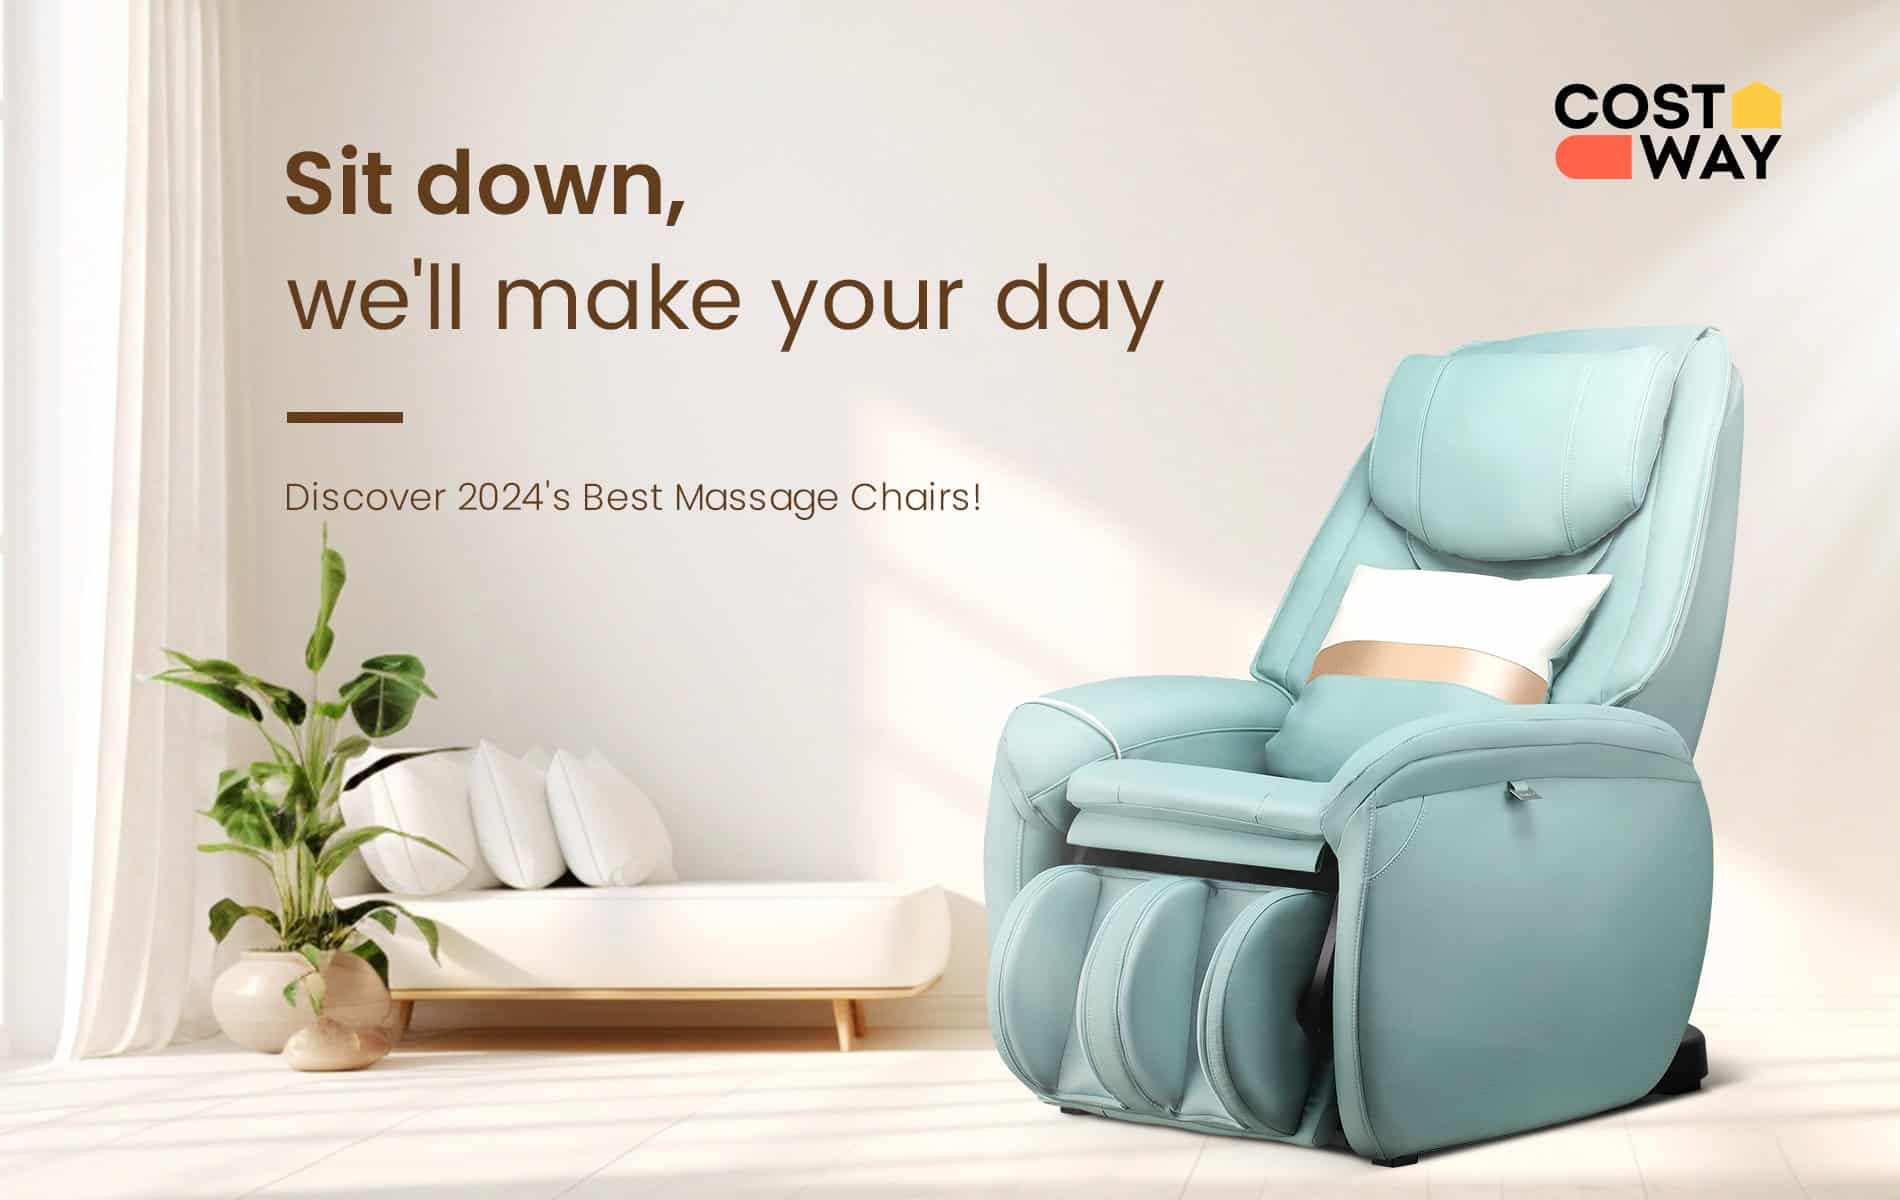 Escape to Bliss: The Costway Massage Chair's Full Body Zero Gravity Relaxation